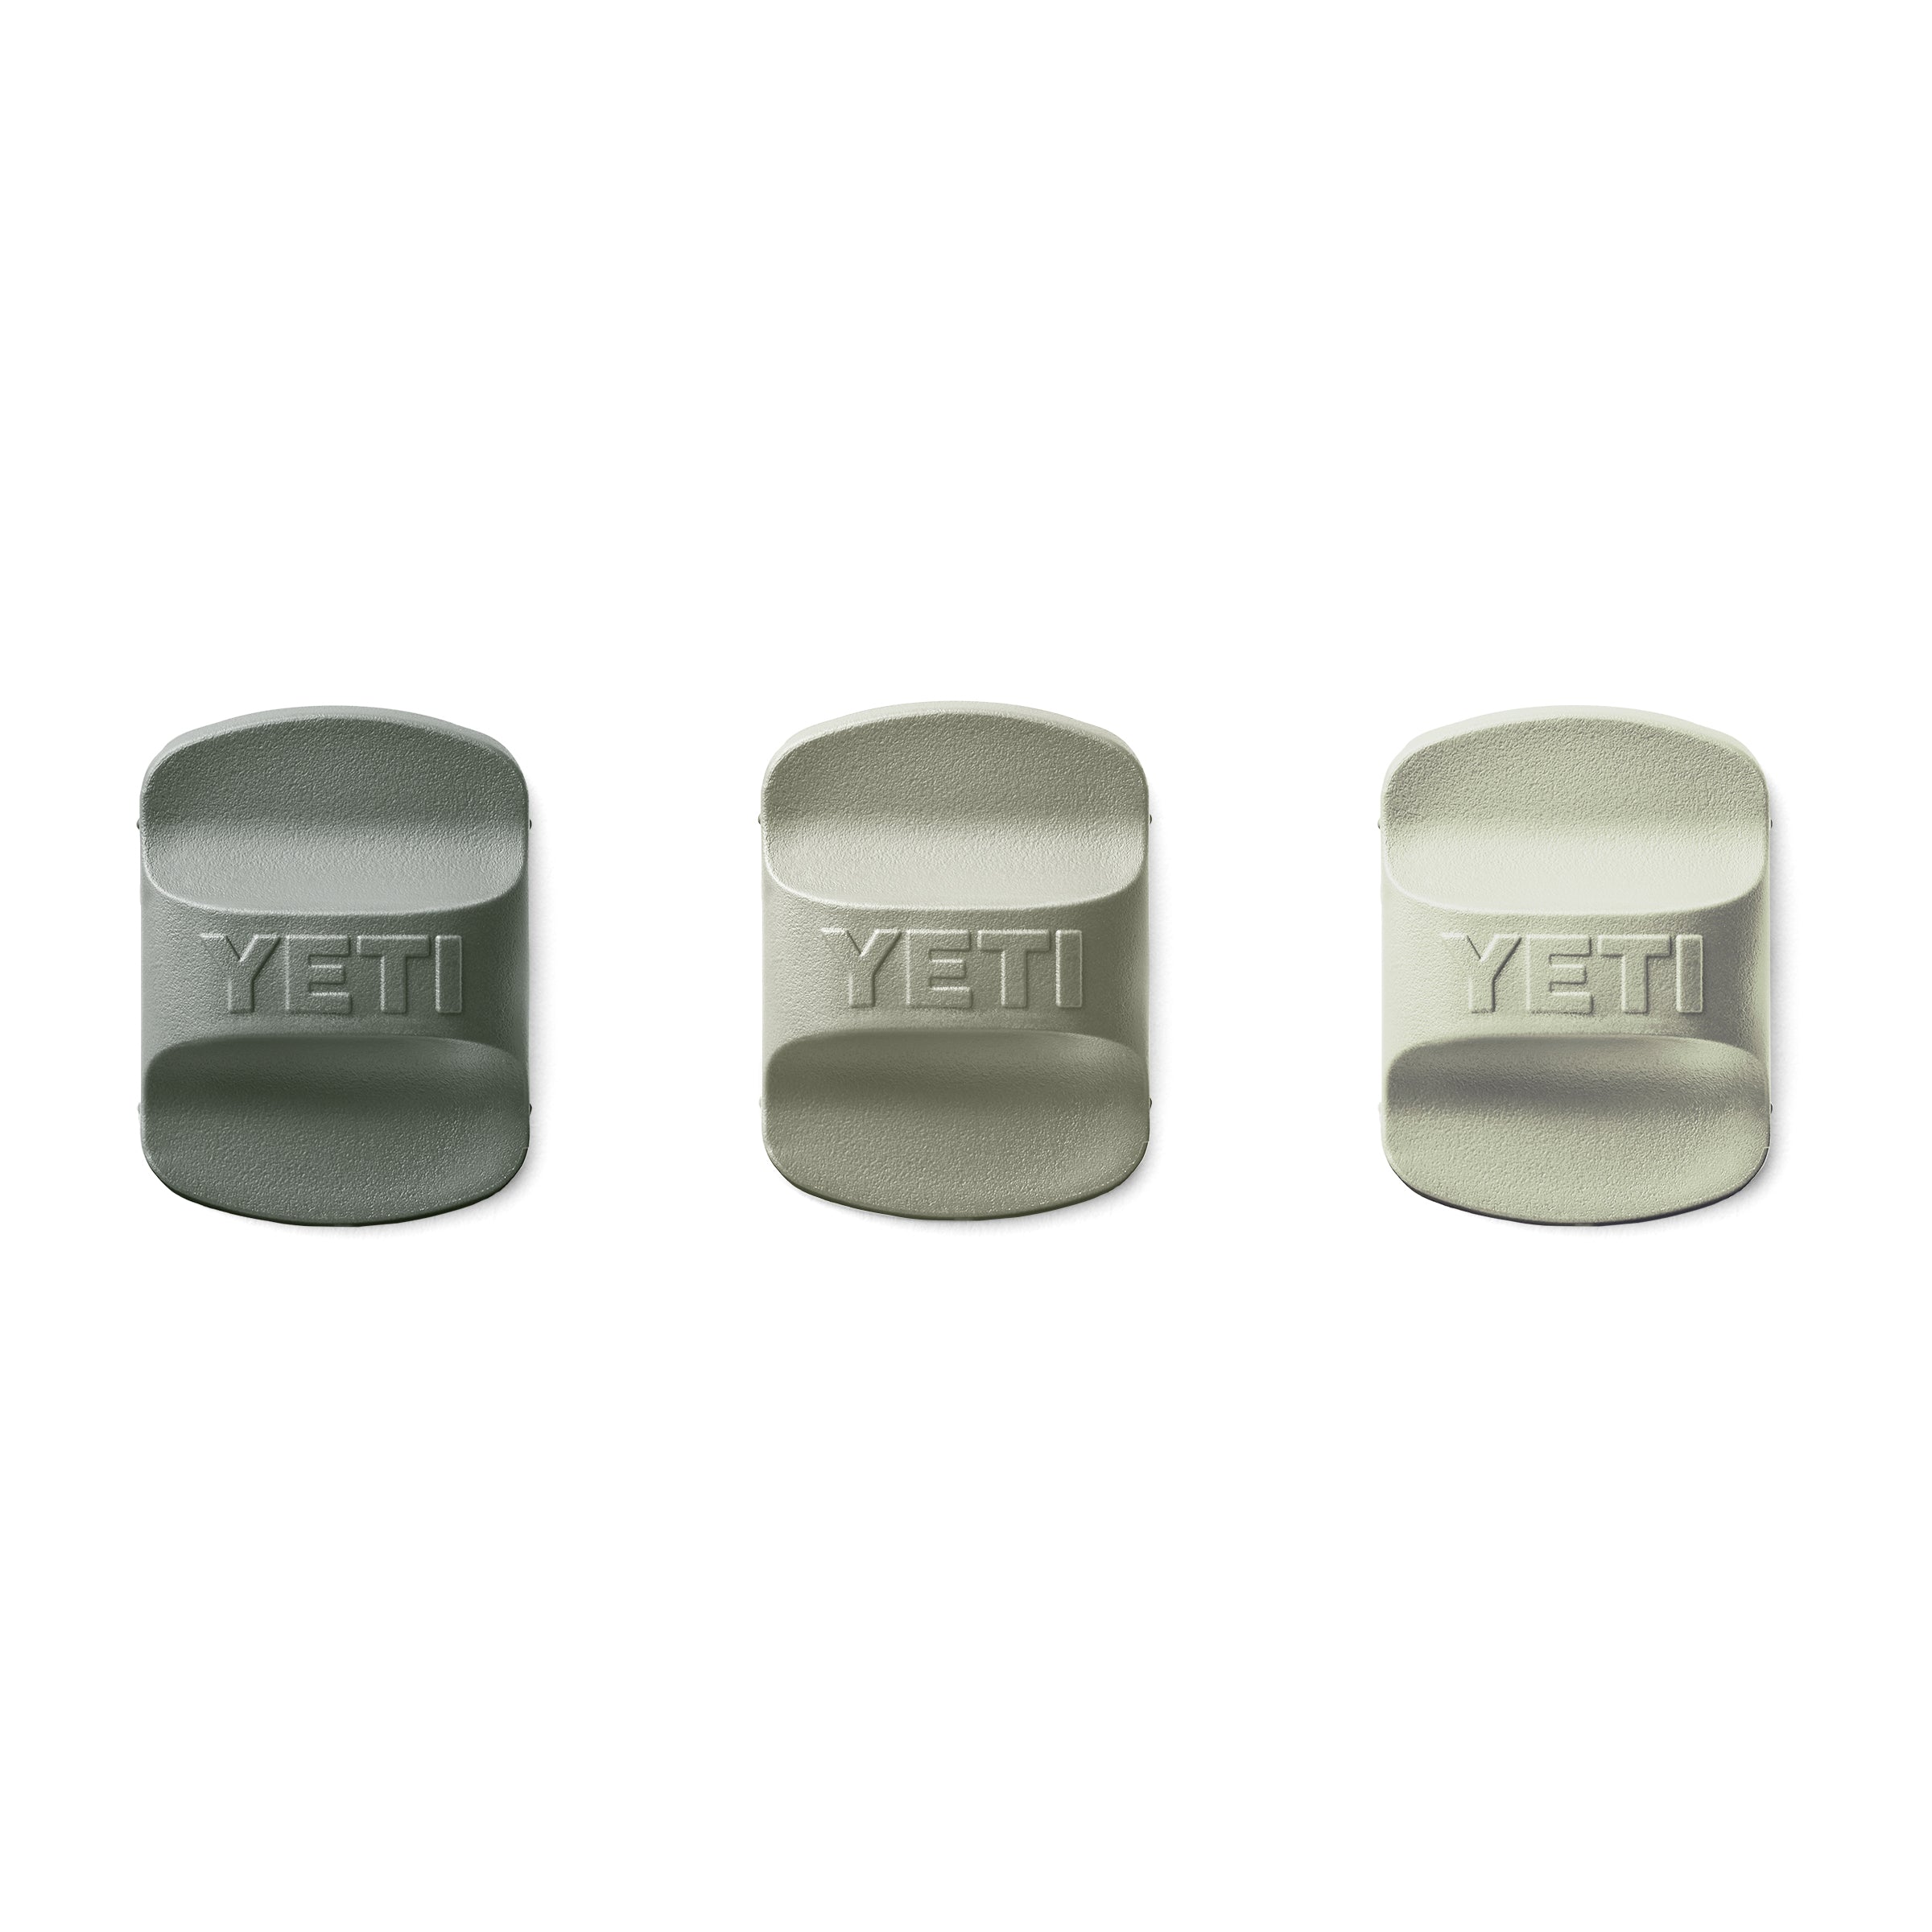 Magnetic slider compatible with Yeti - magnetic slider replacement,  compatible with all Yeti magnetic lids (3 pack) Red, Blue, Green